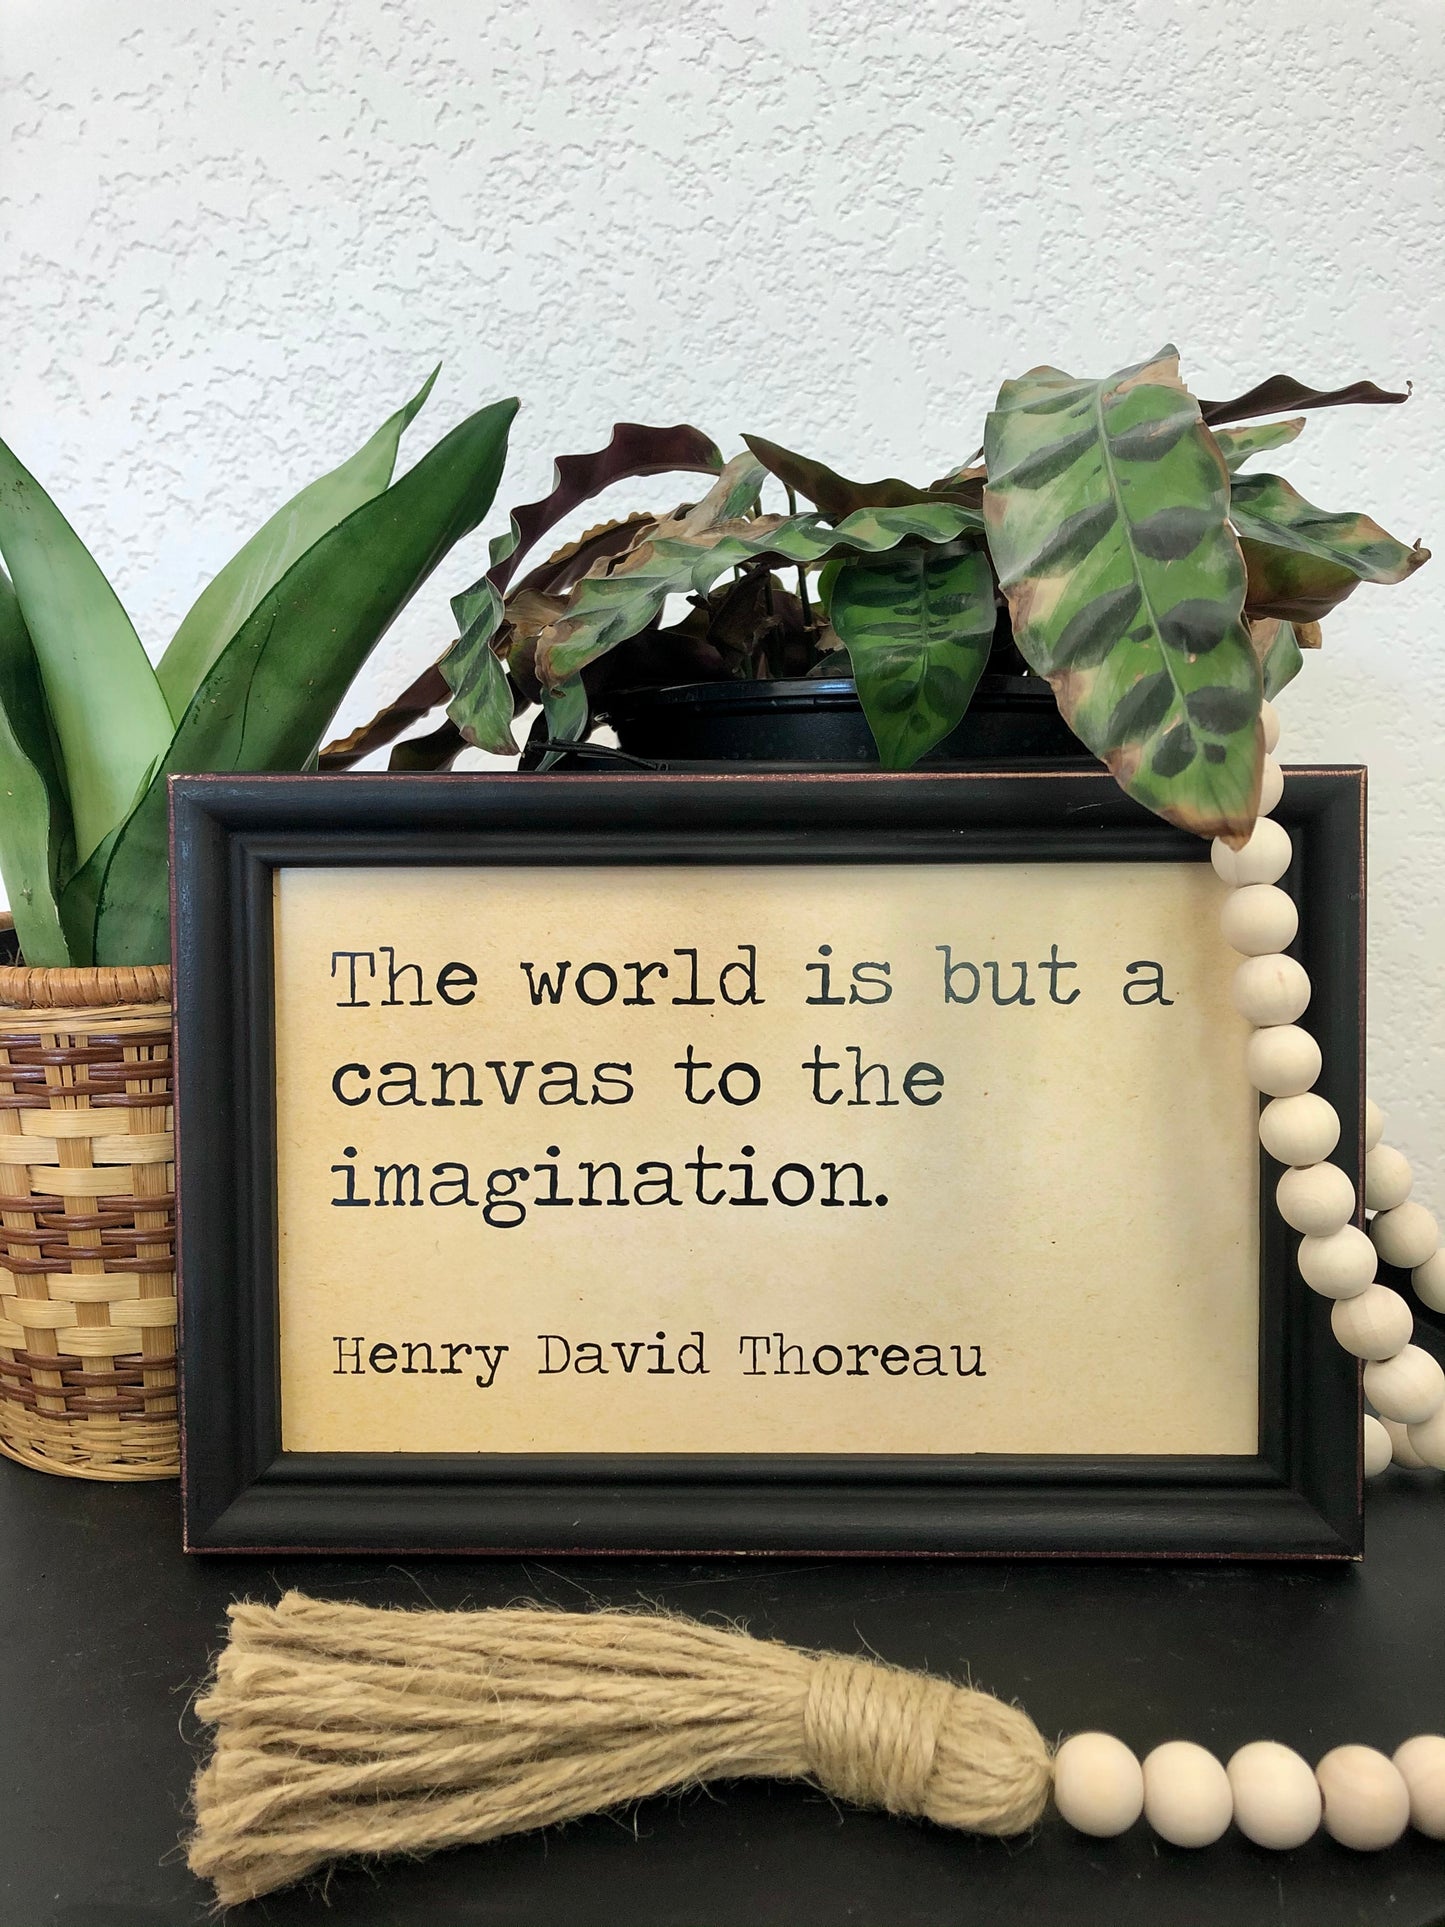 Framed Wall Quote - Henry David Thoreau